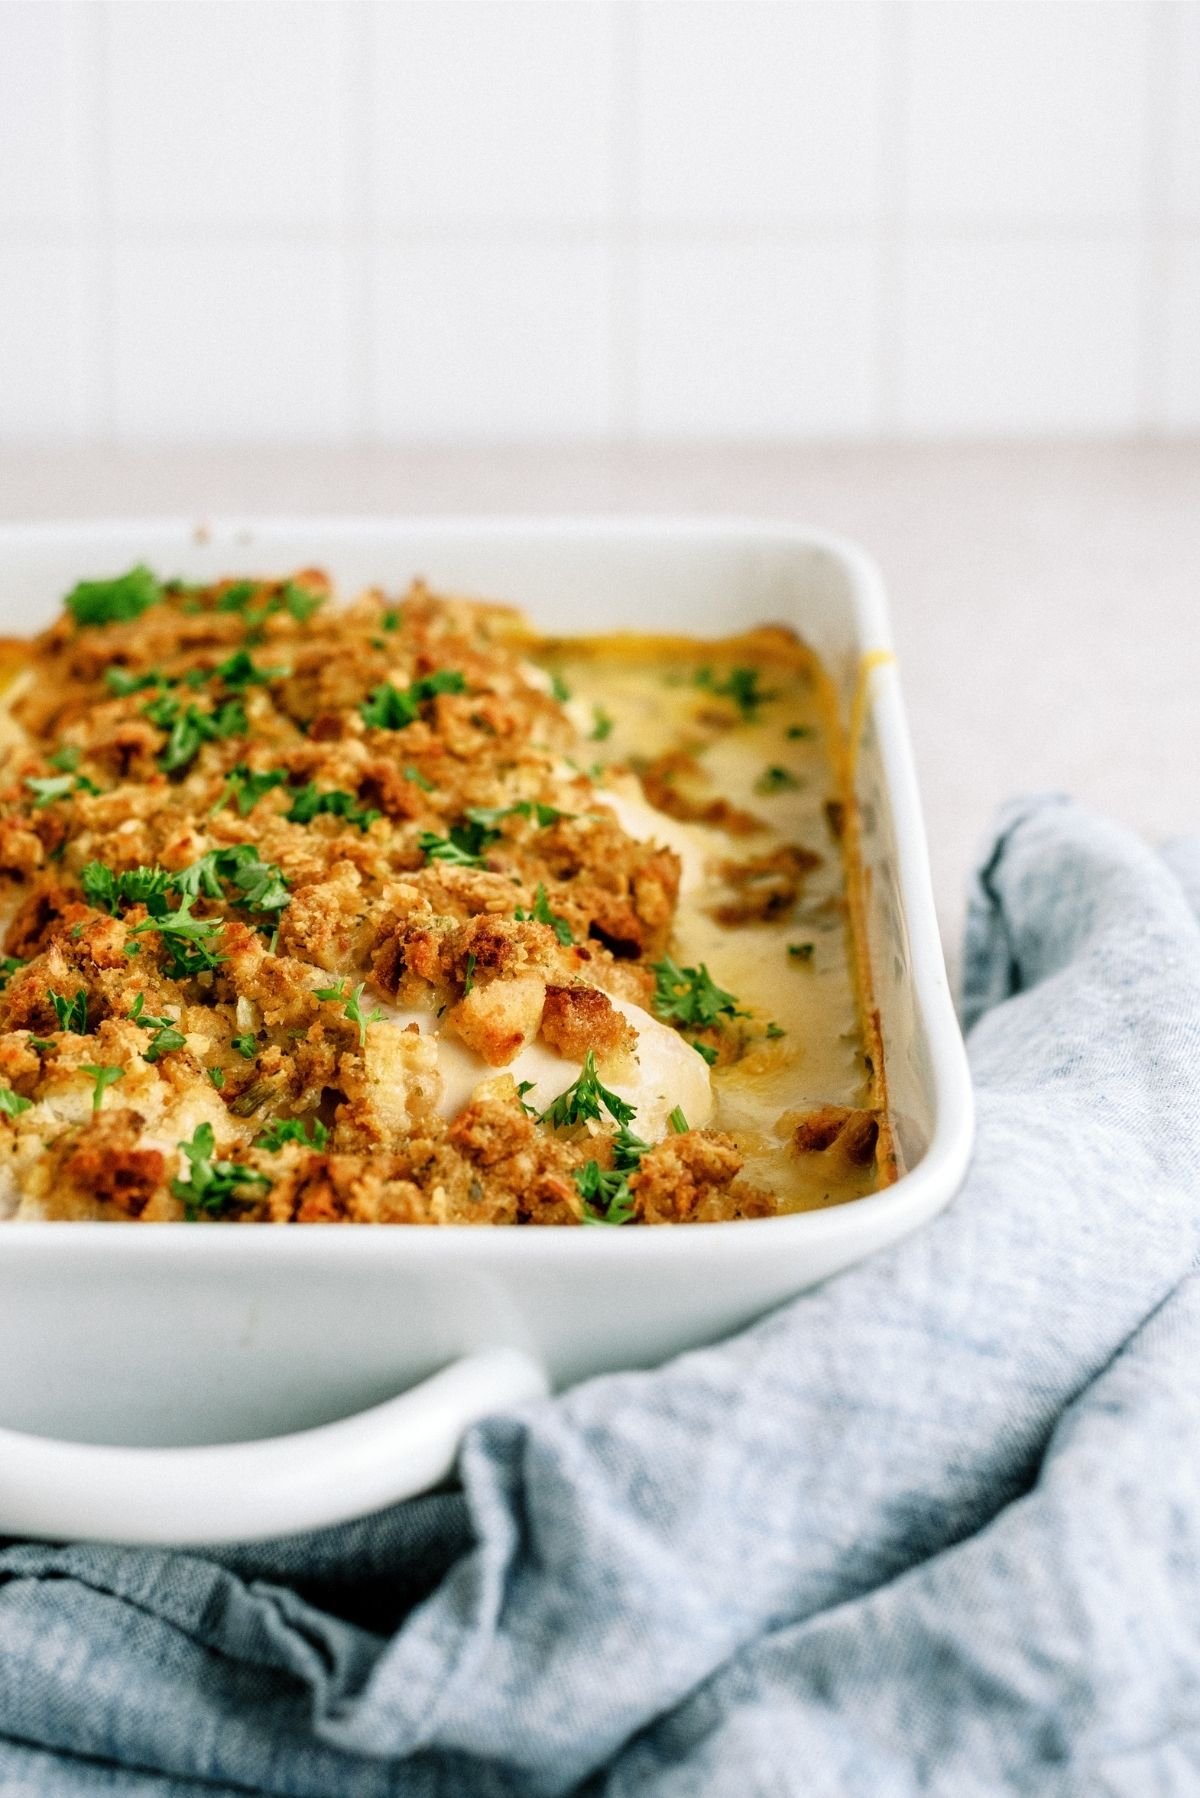 Casserole dish with Savory Chicken and Stuffing Bake